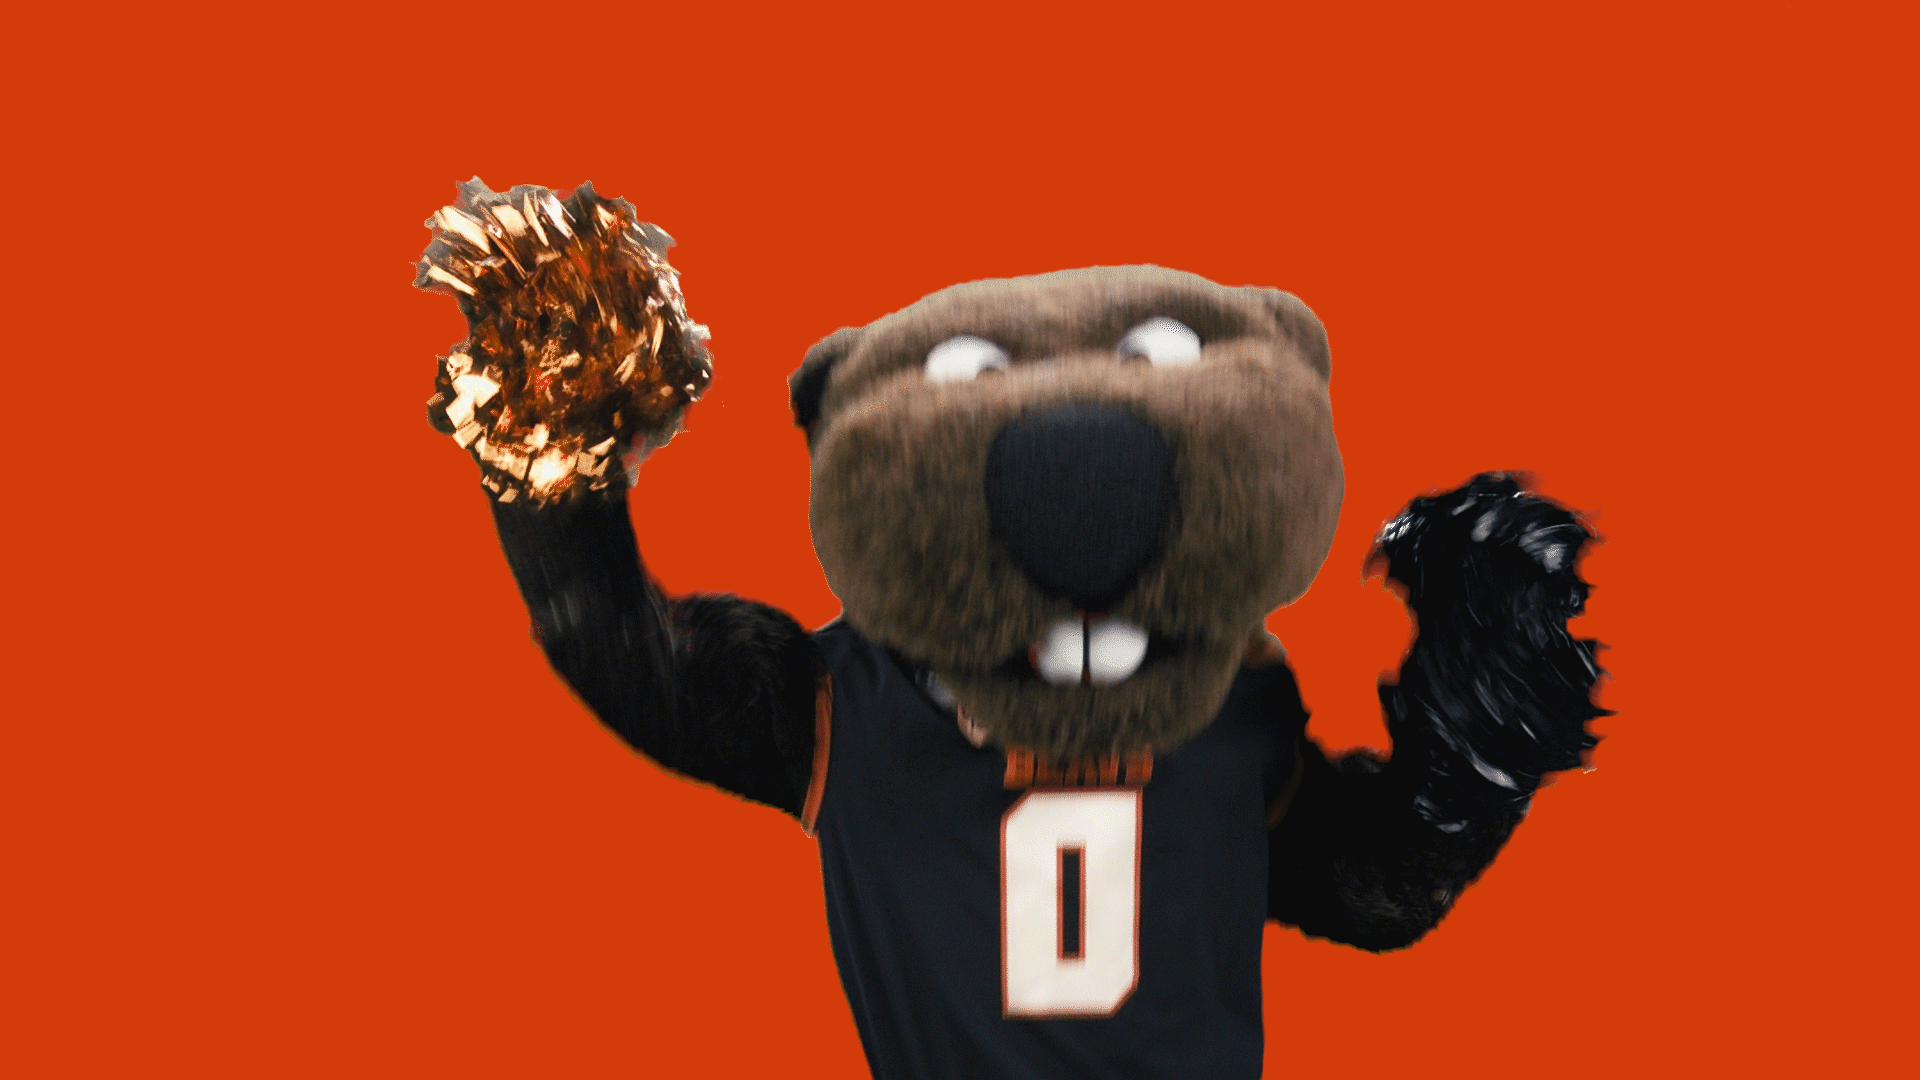 Benny dancing with pom poms with an orange background